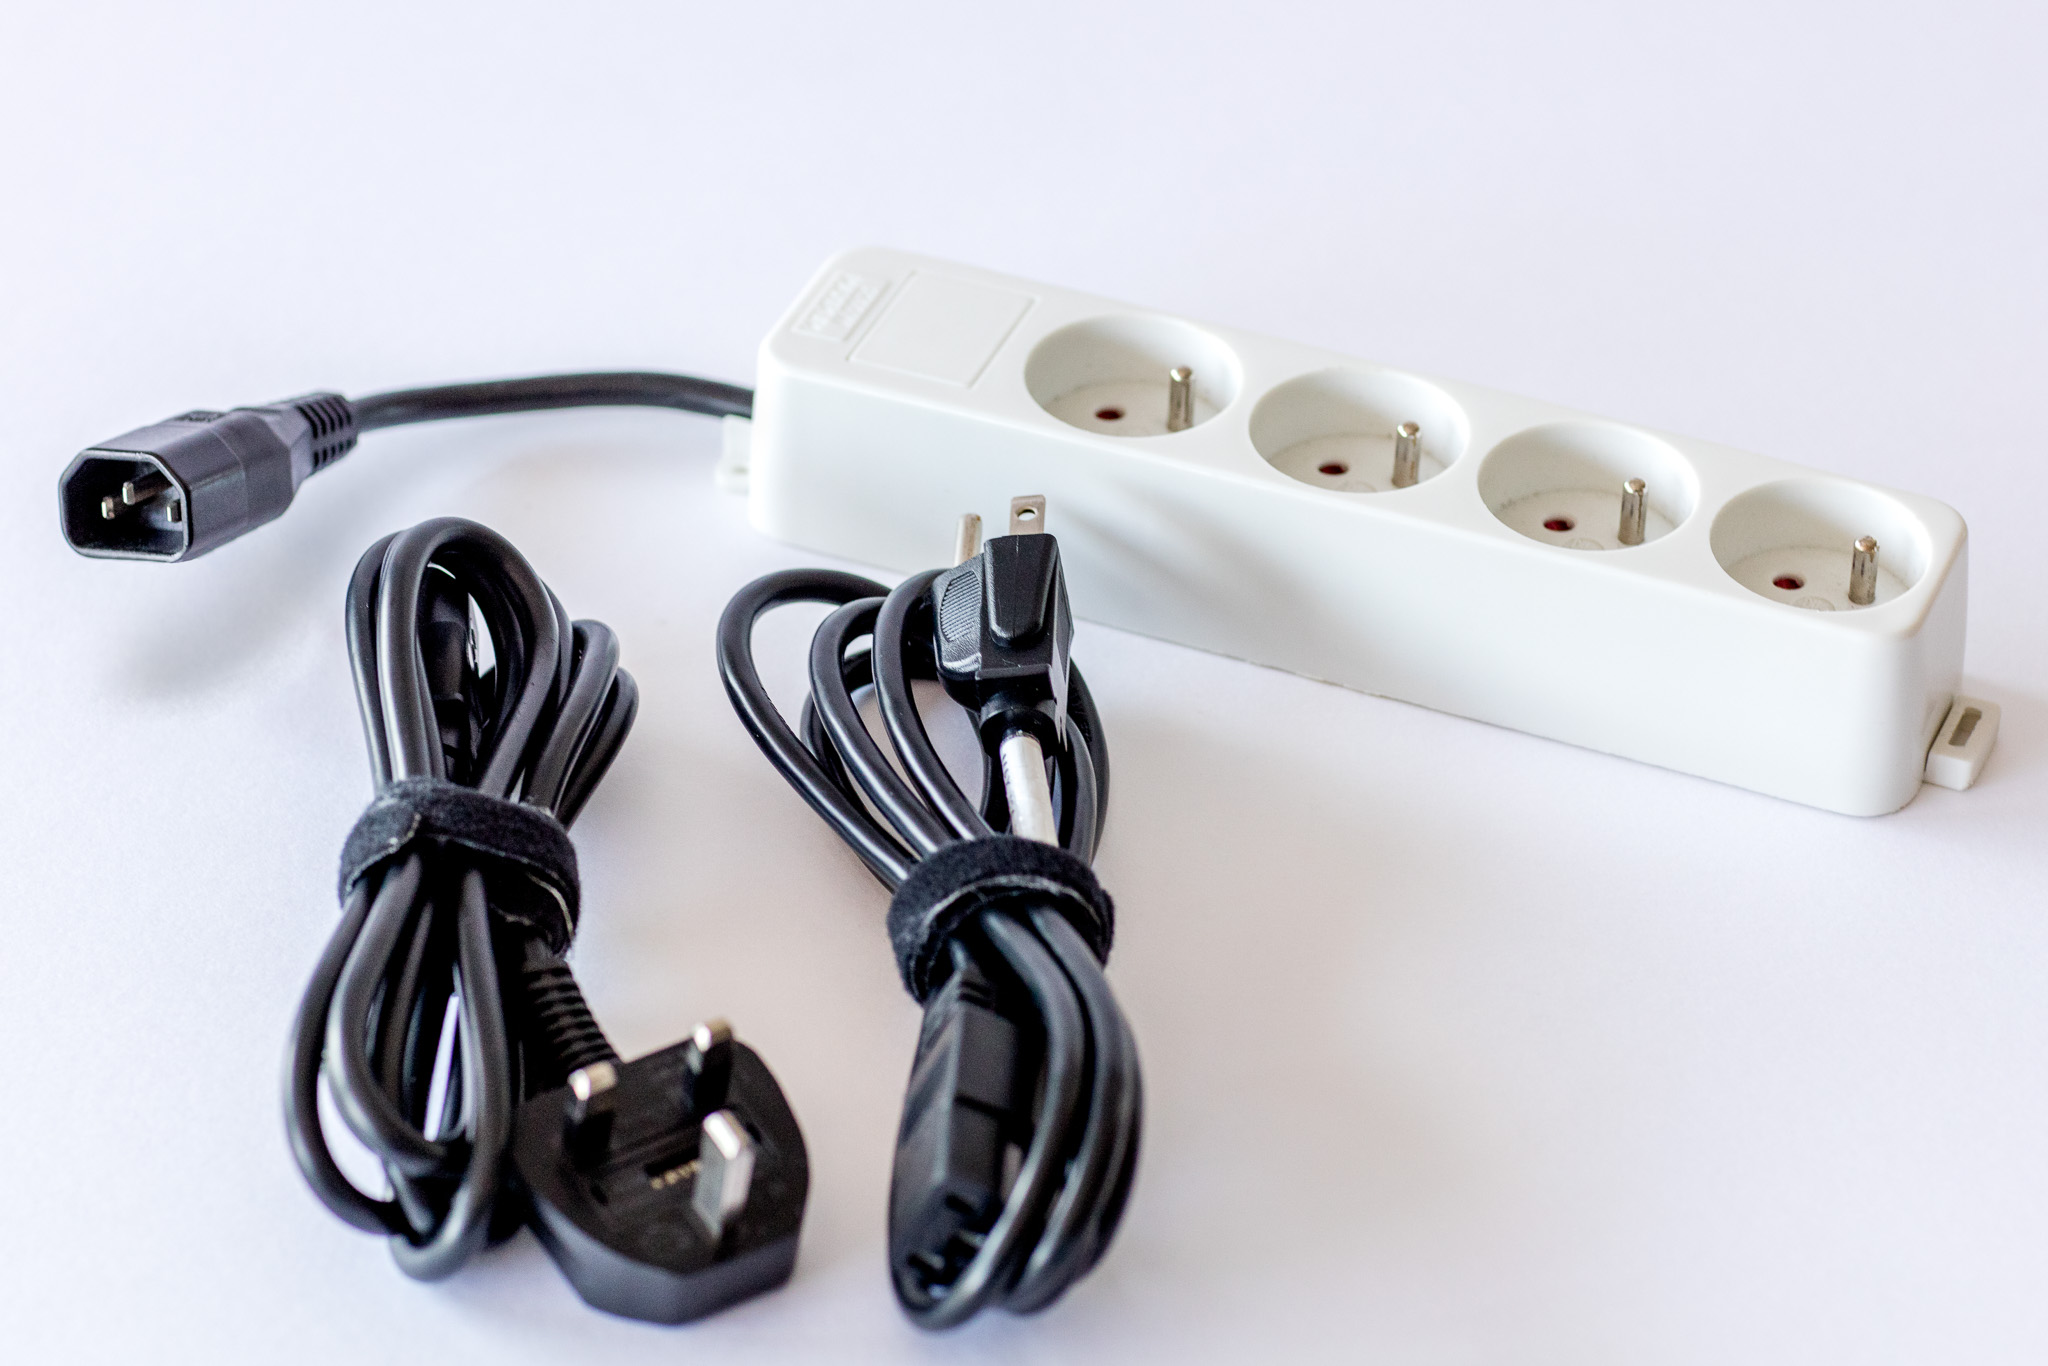  Universal Power Strip by victorie.com